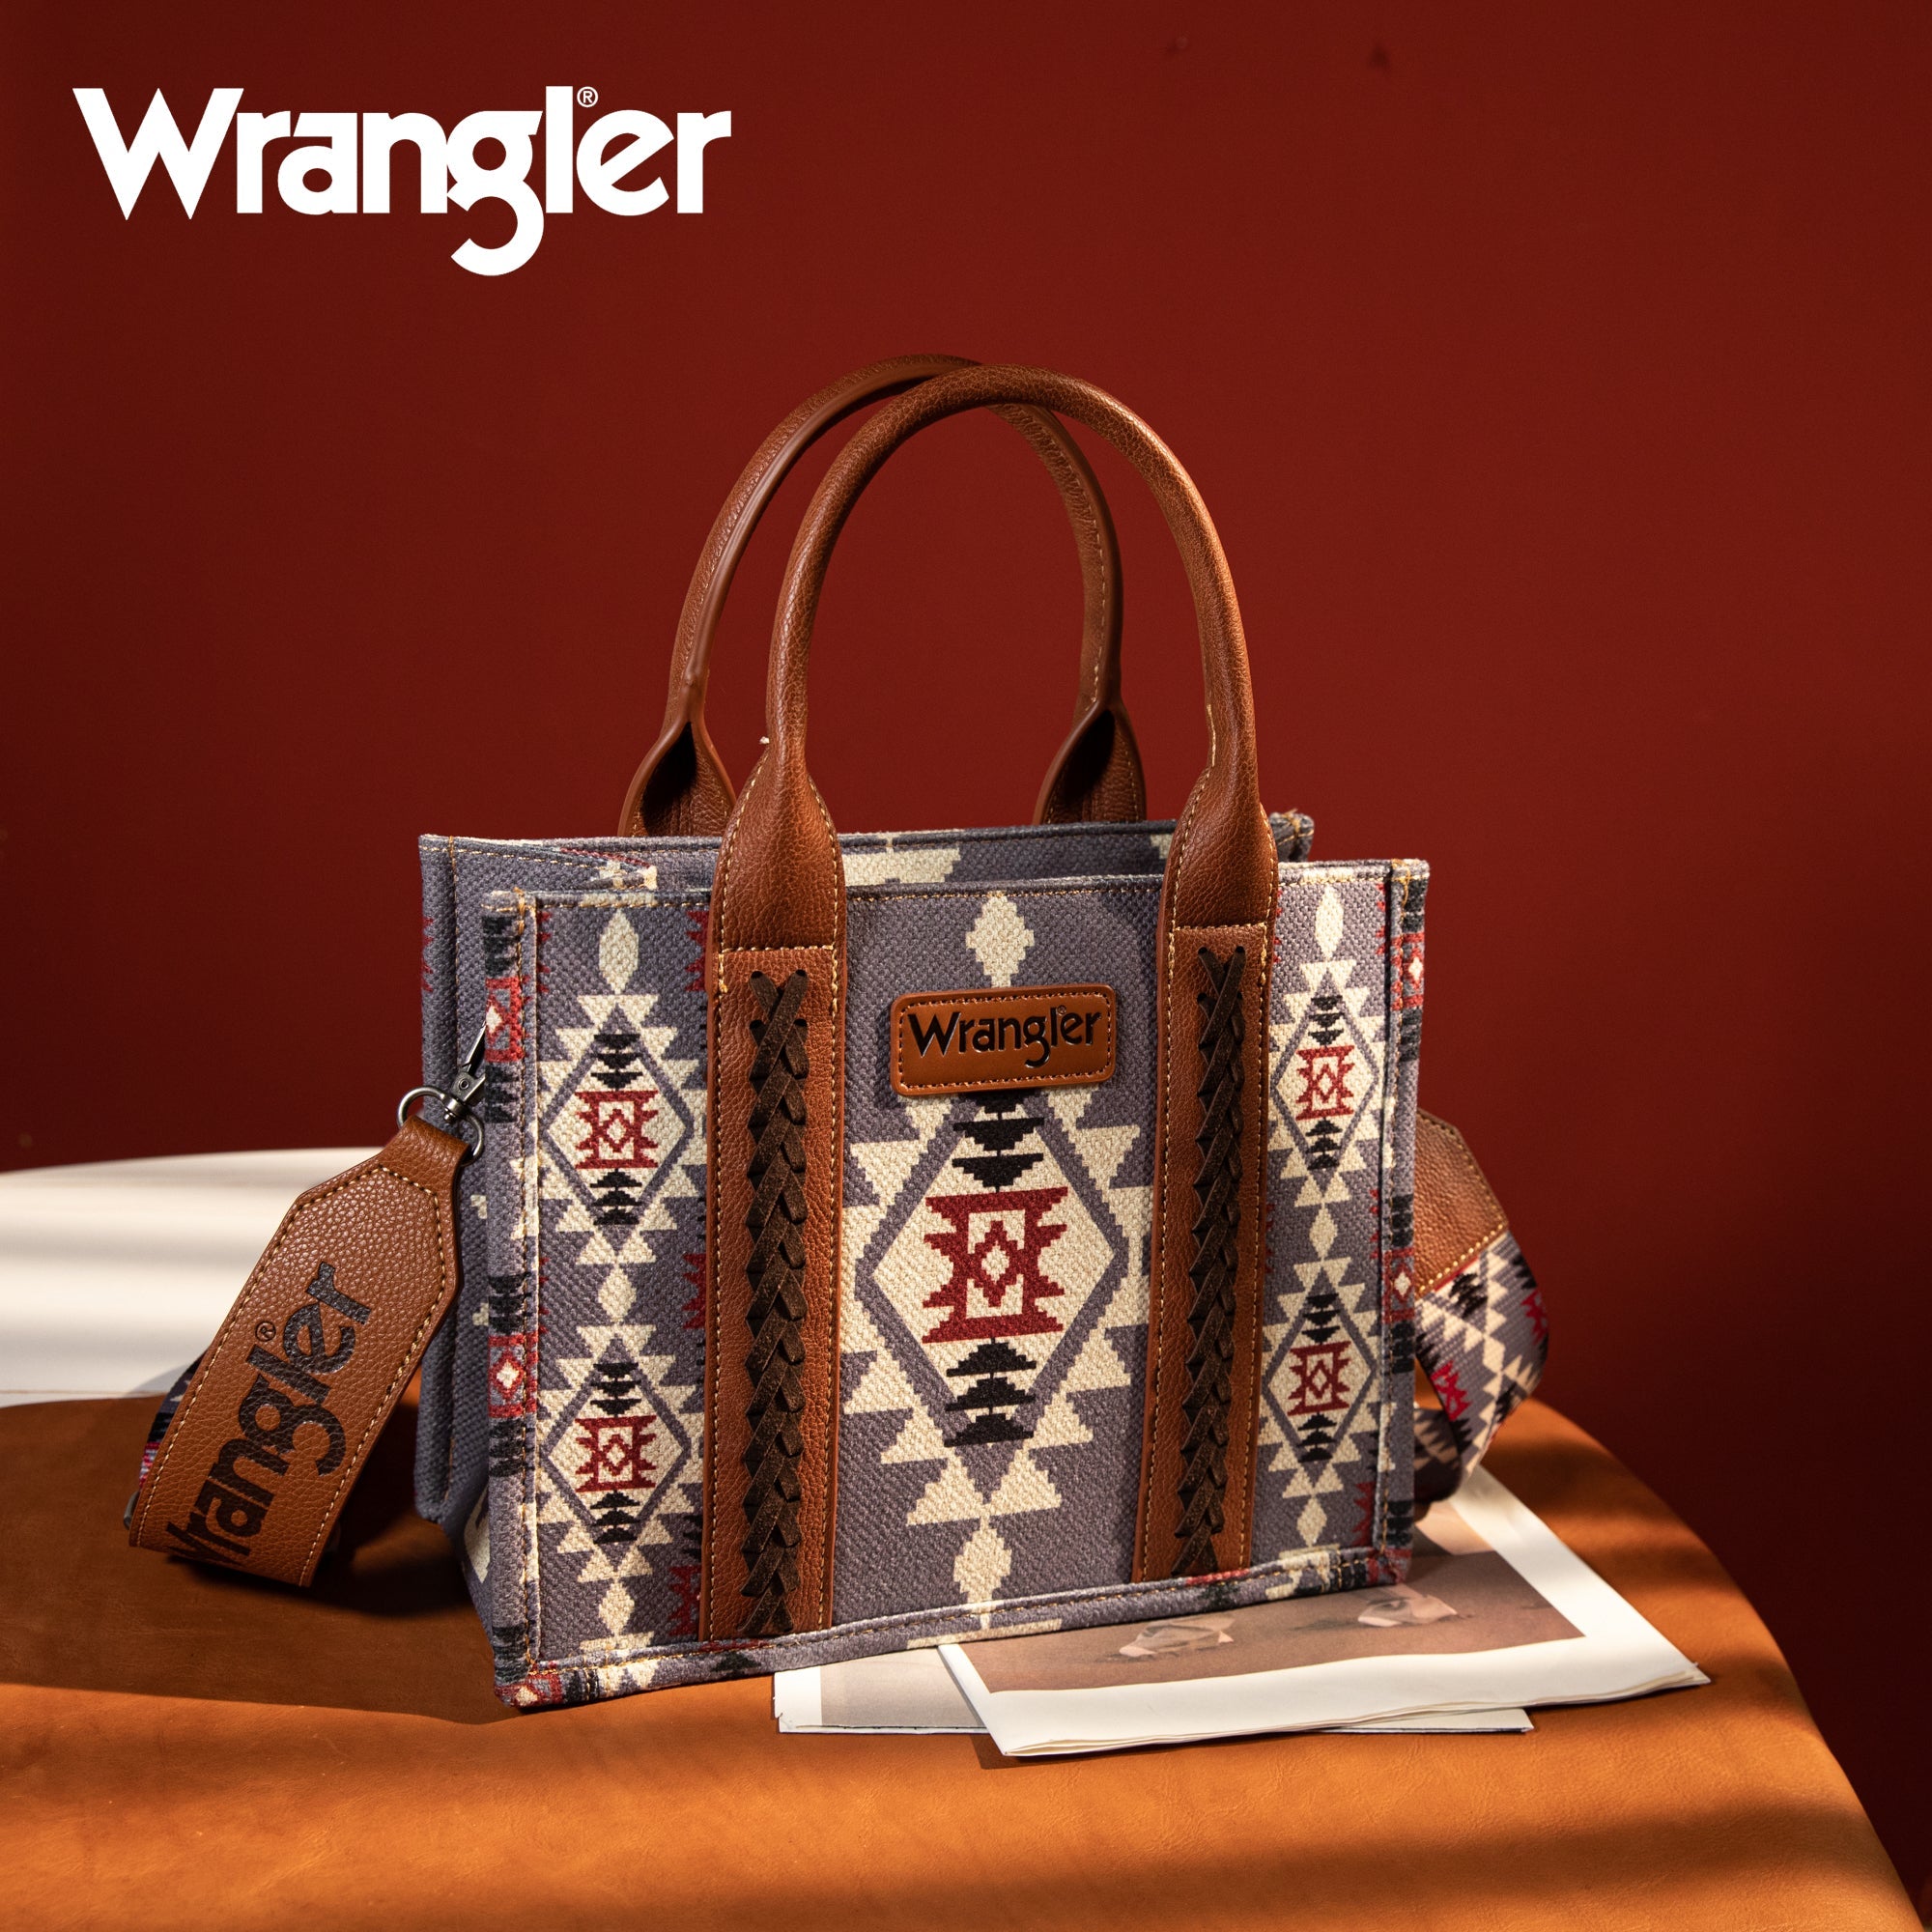 The cutest bag ever! The strap is everything!!! #wrangler #purse #fypシ